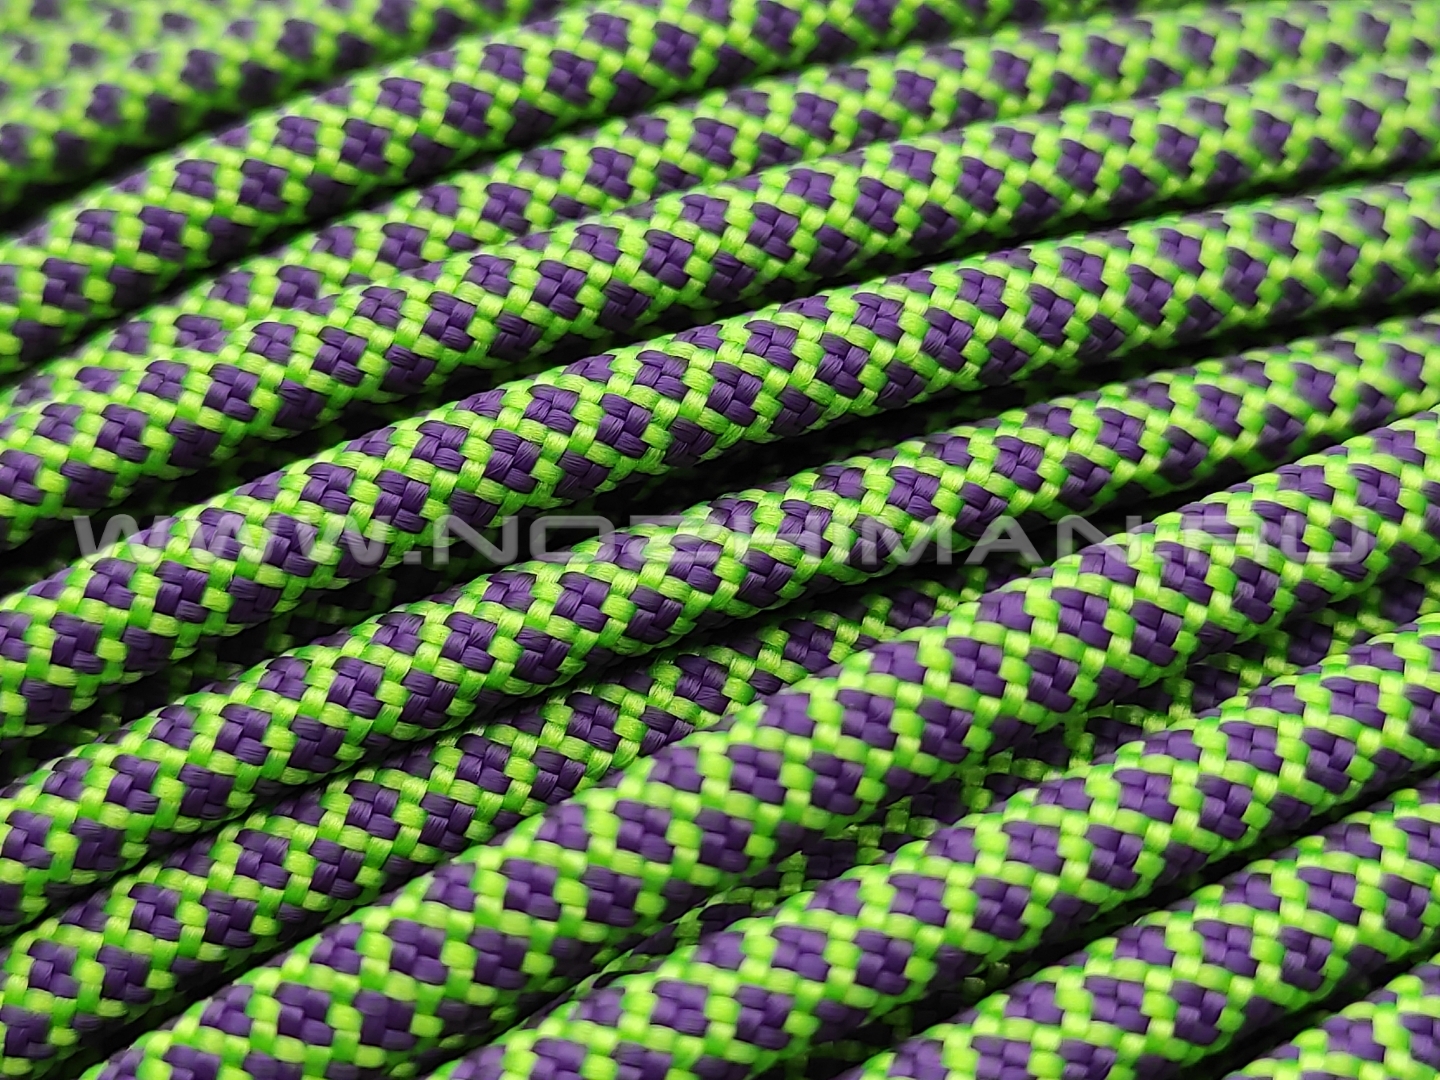 CORD Paracord 550 Zombie Snake